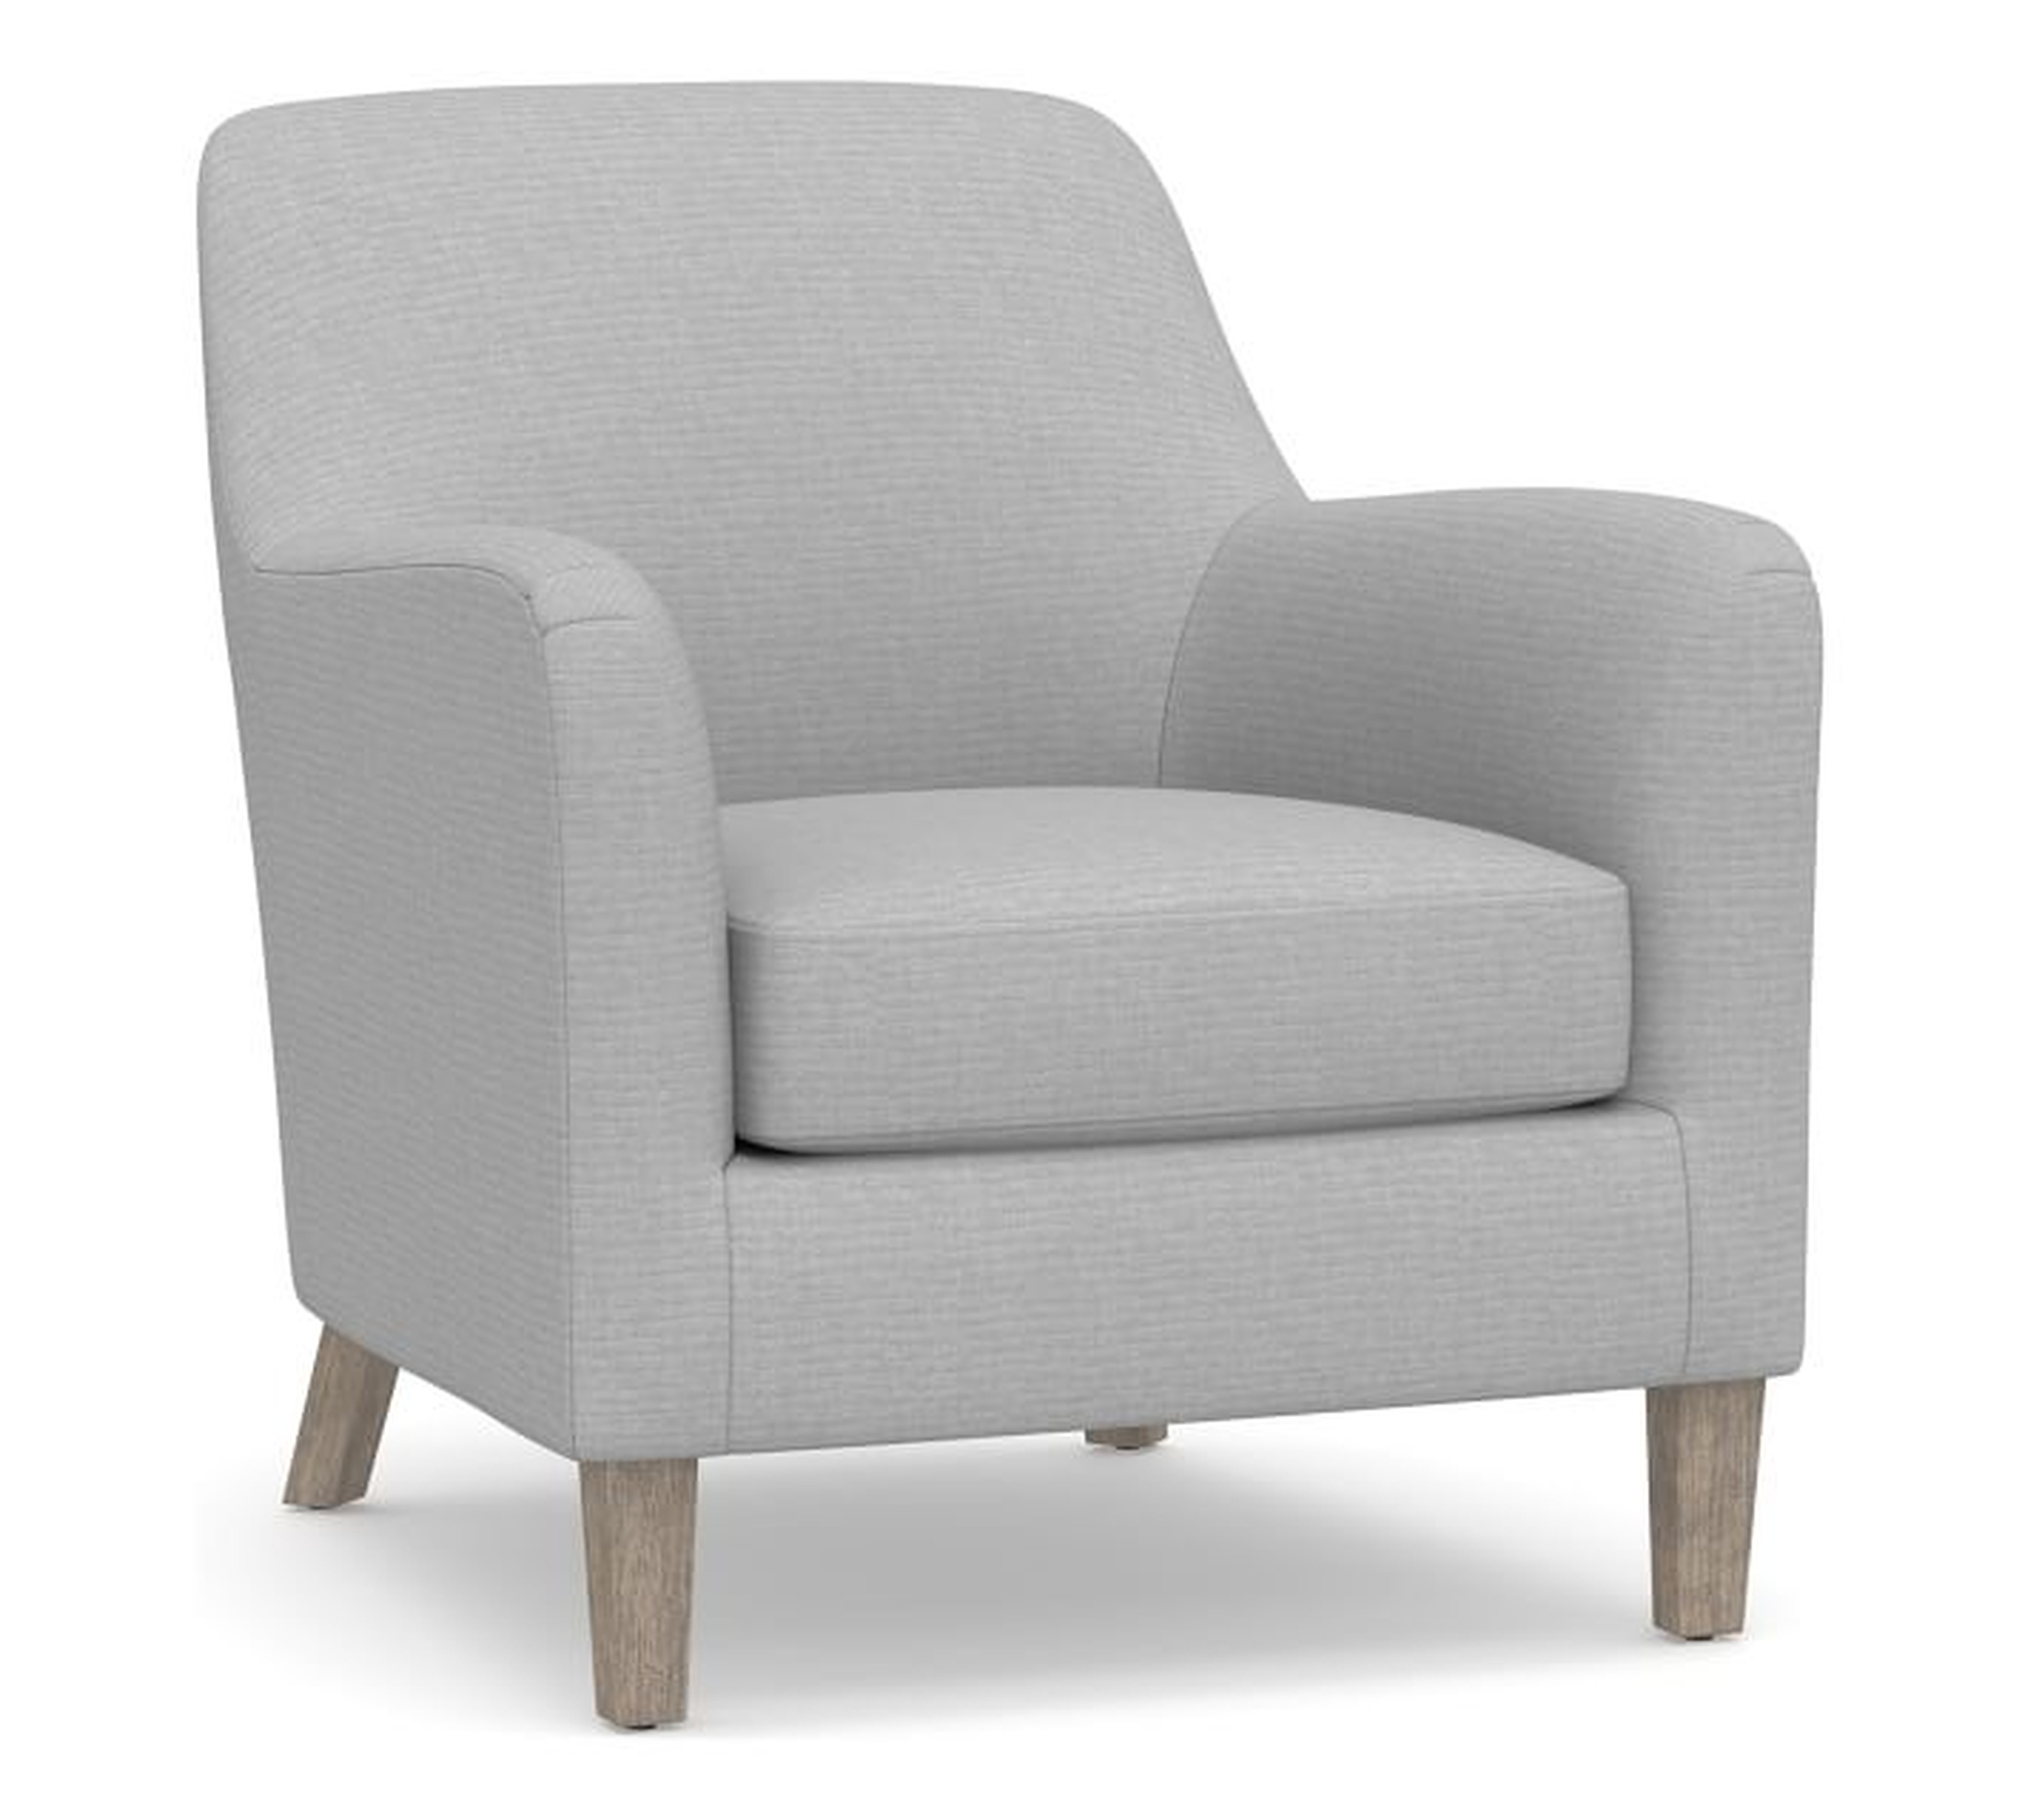 SoMa Burton Upholstered Armchair, Polyester Wrapped Cushions, Brushed Crossweave Light Gray - Pottery Barn